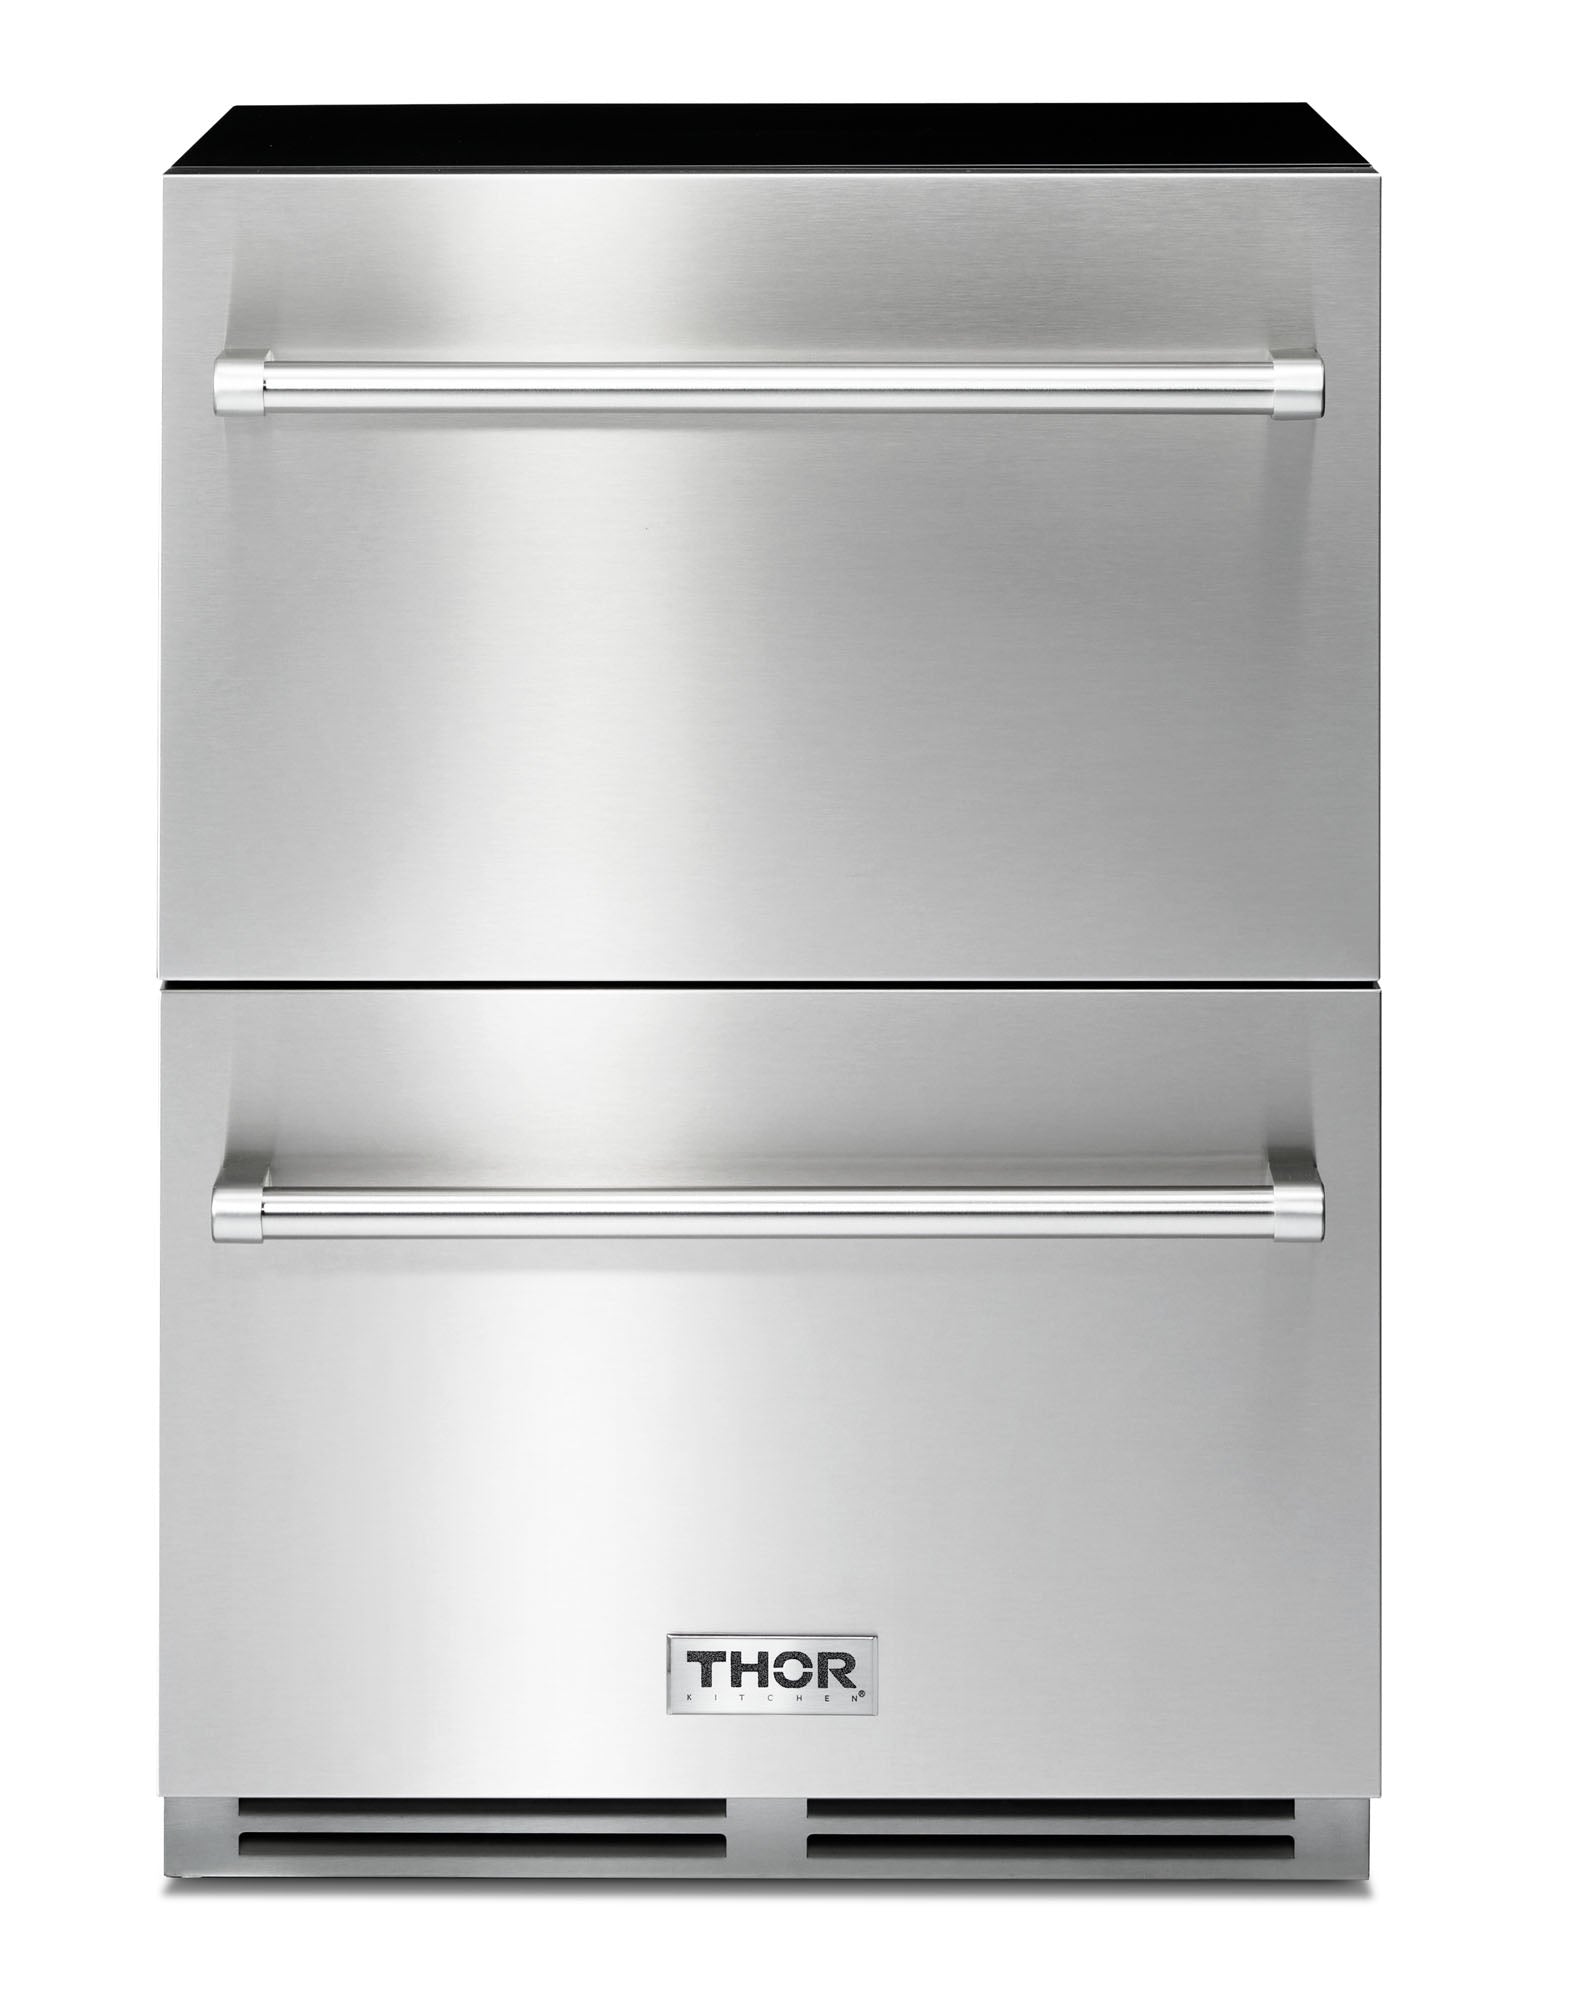 Thor Kitchen HRE2401 24 Stainless Steel Professional Electric Range